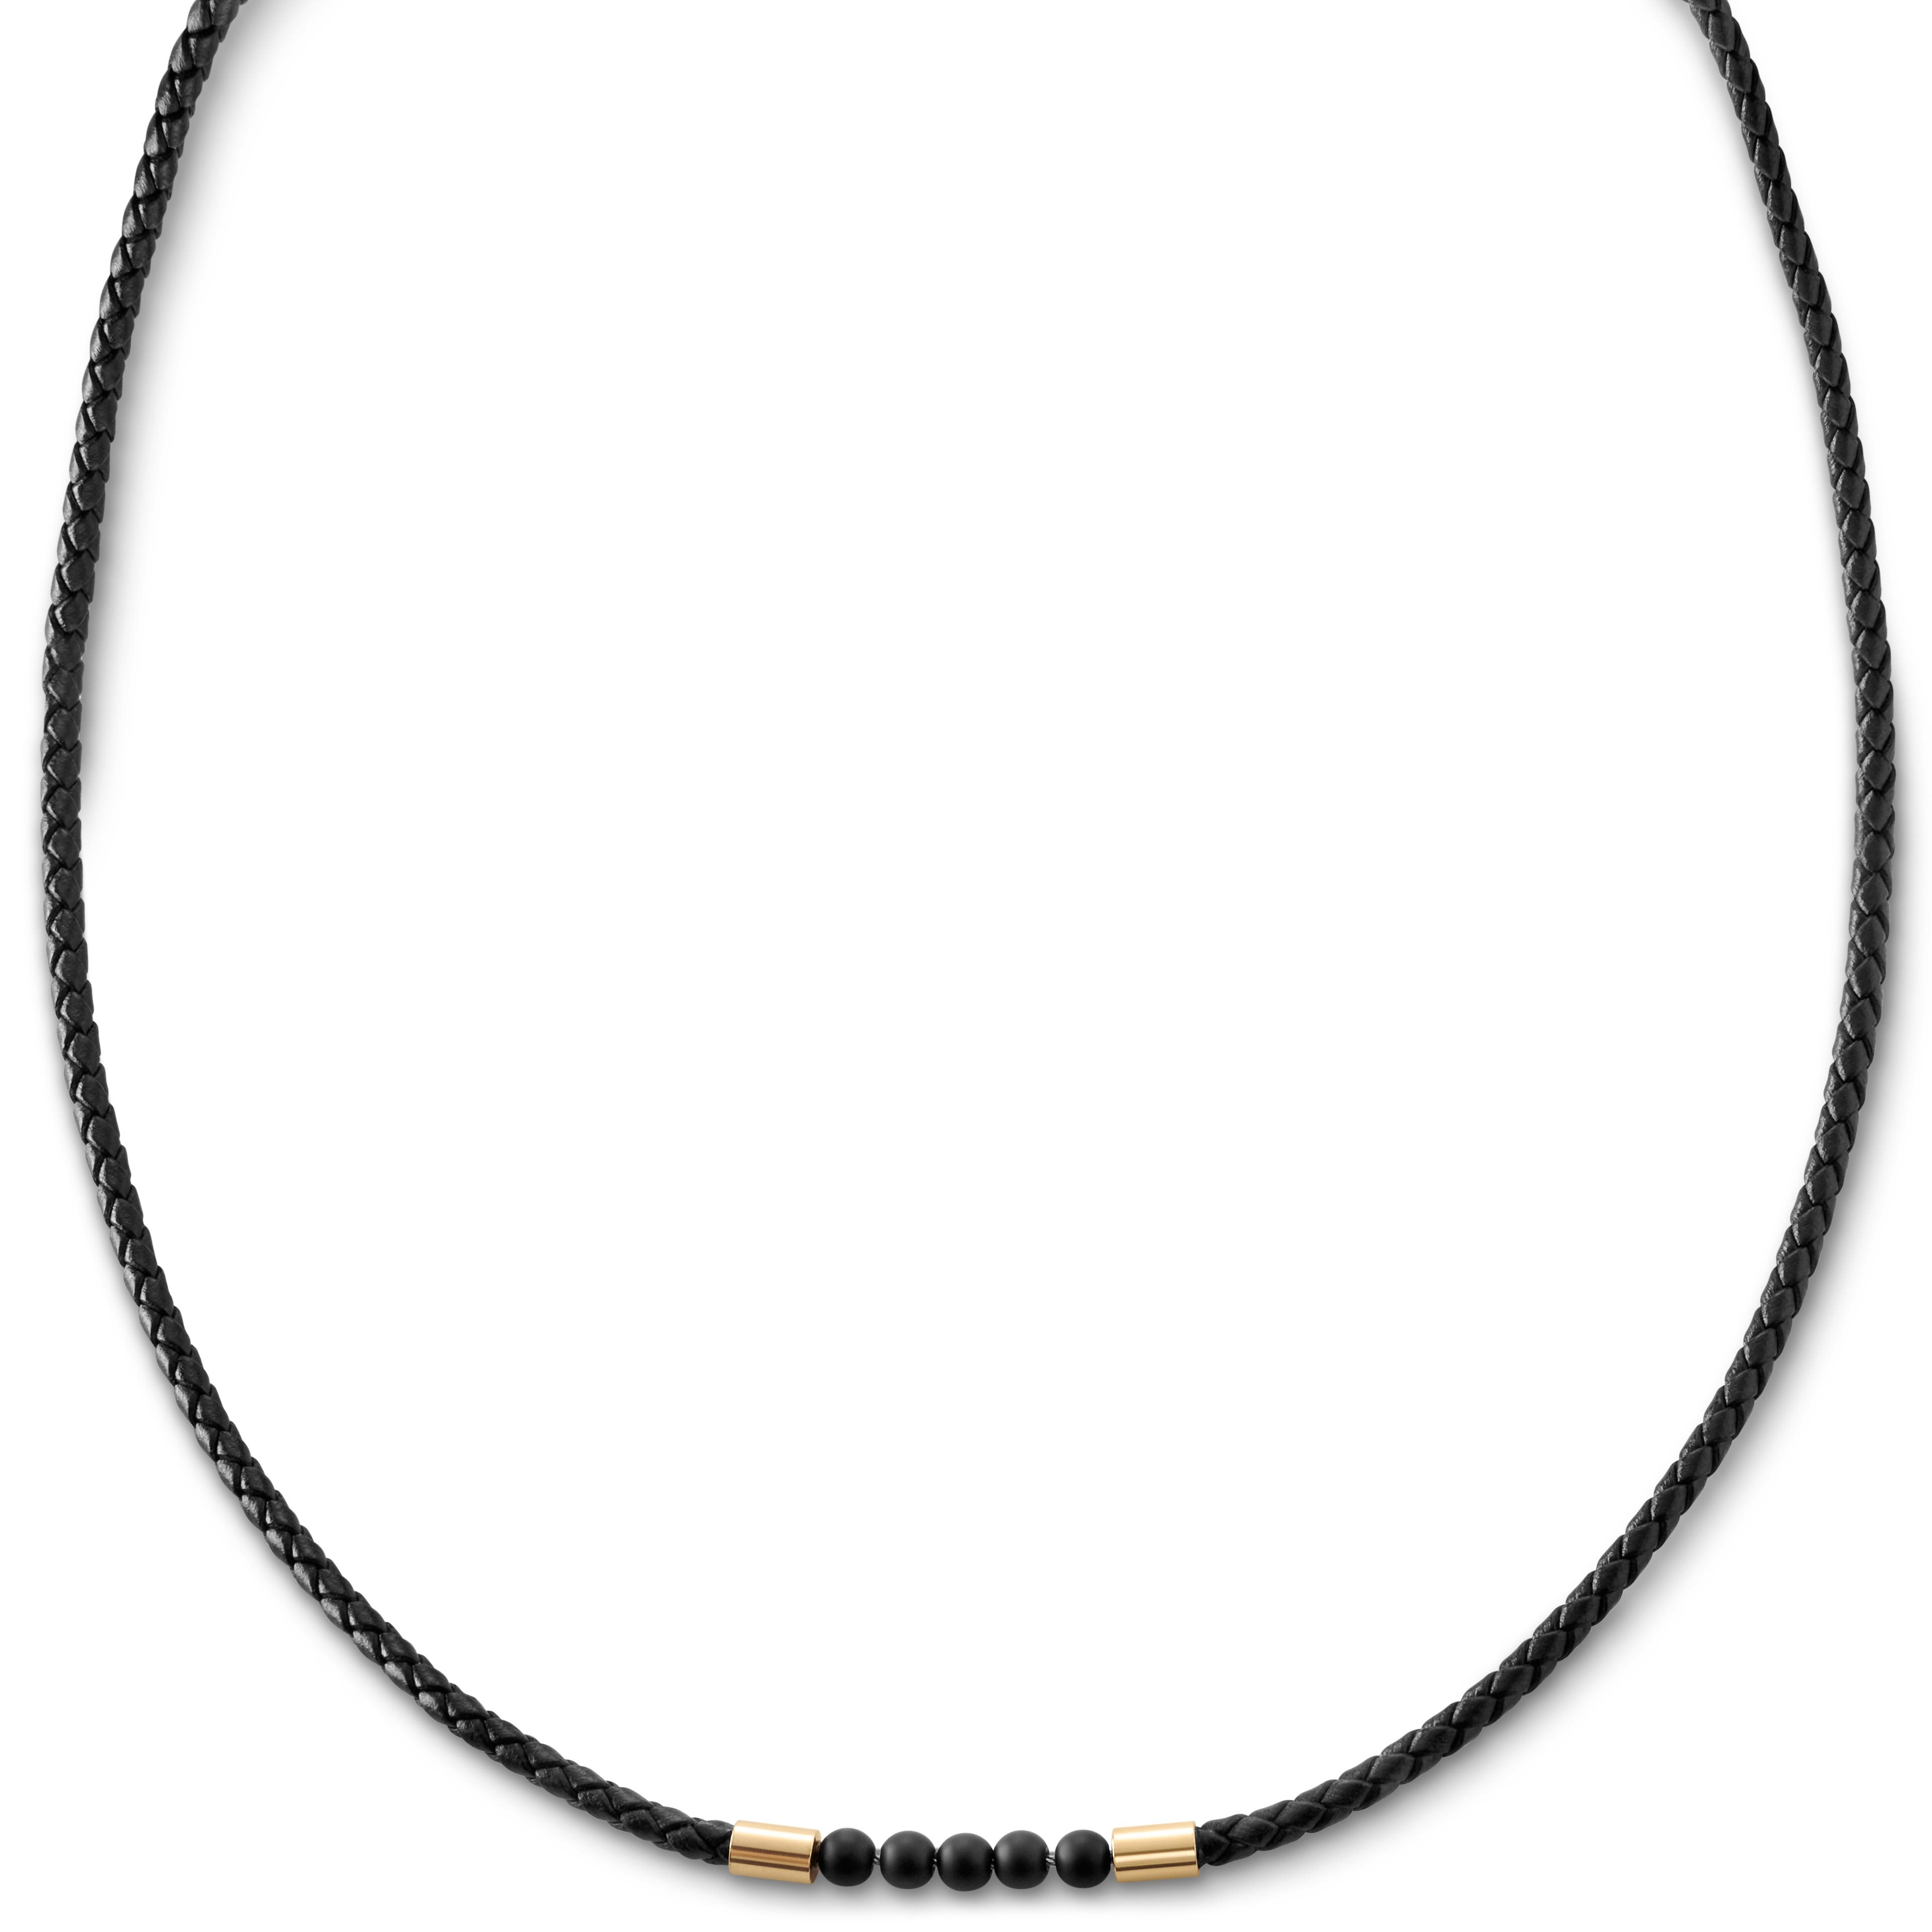 Tenvis | 1/8" (3 mm) Gold-tone Onyx Leather Necklace